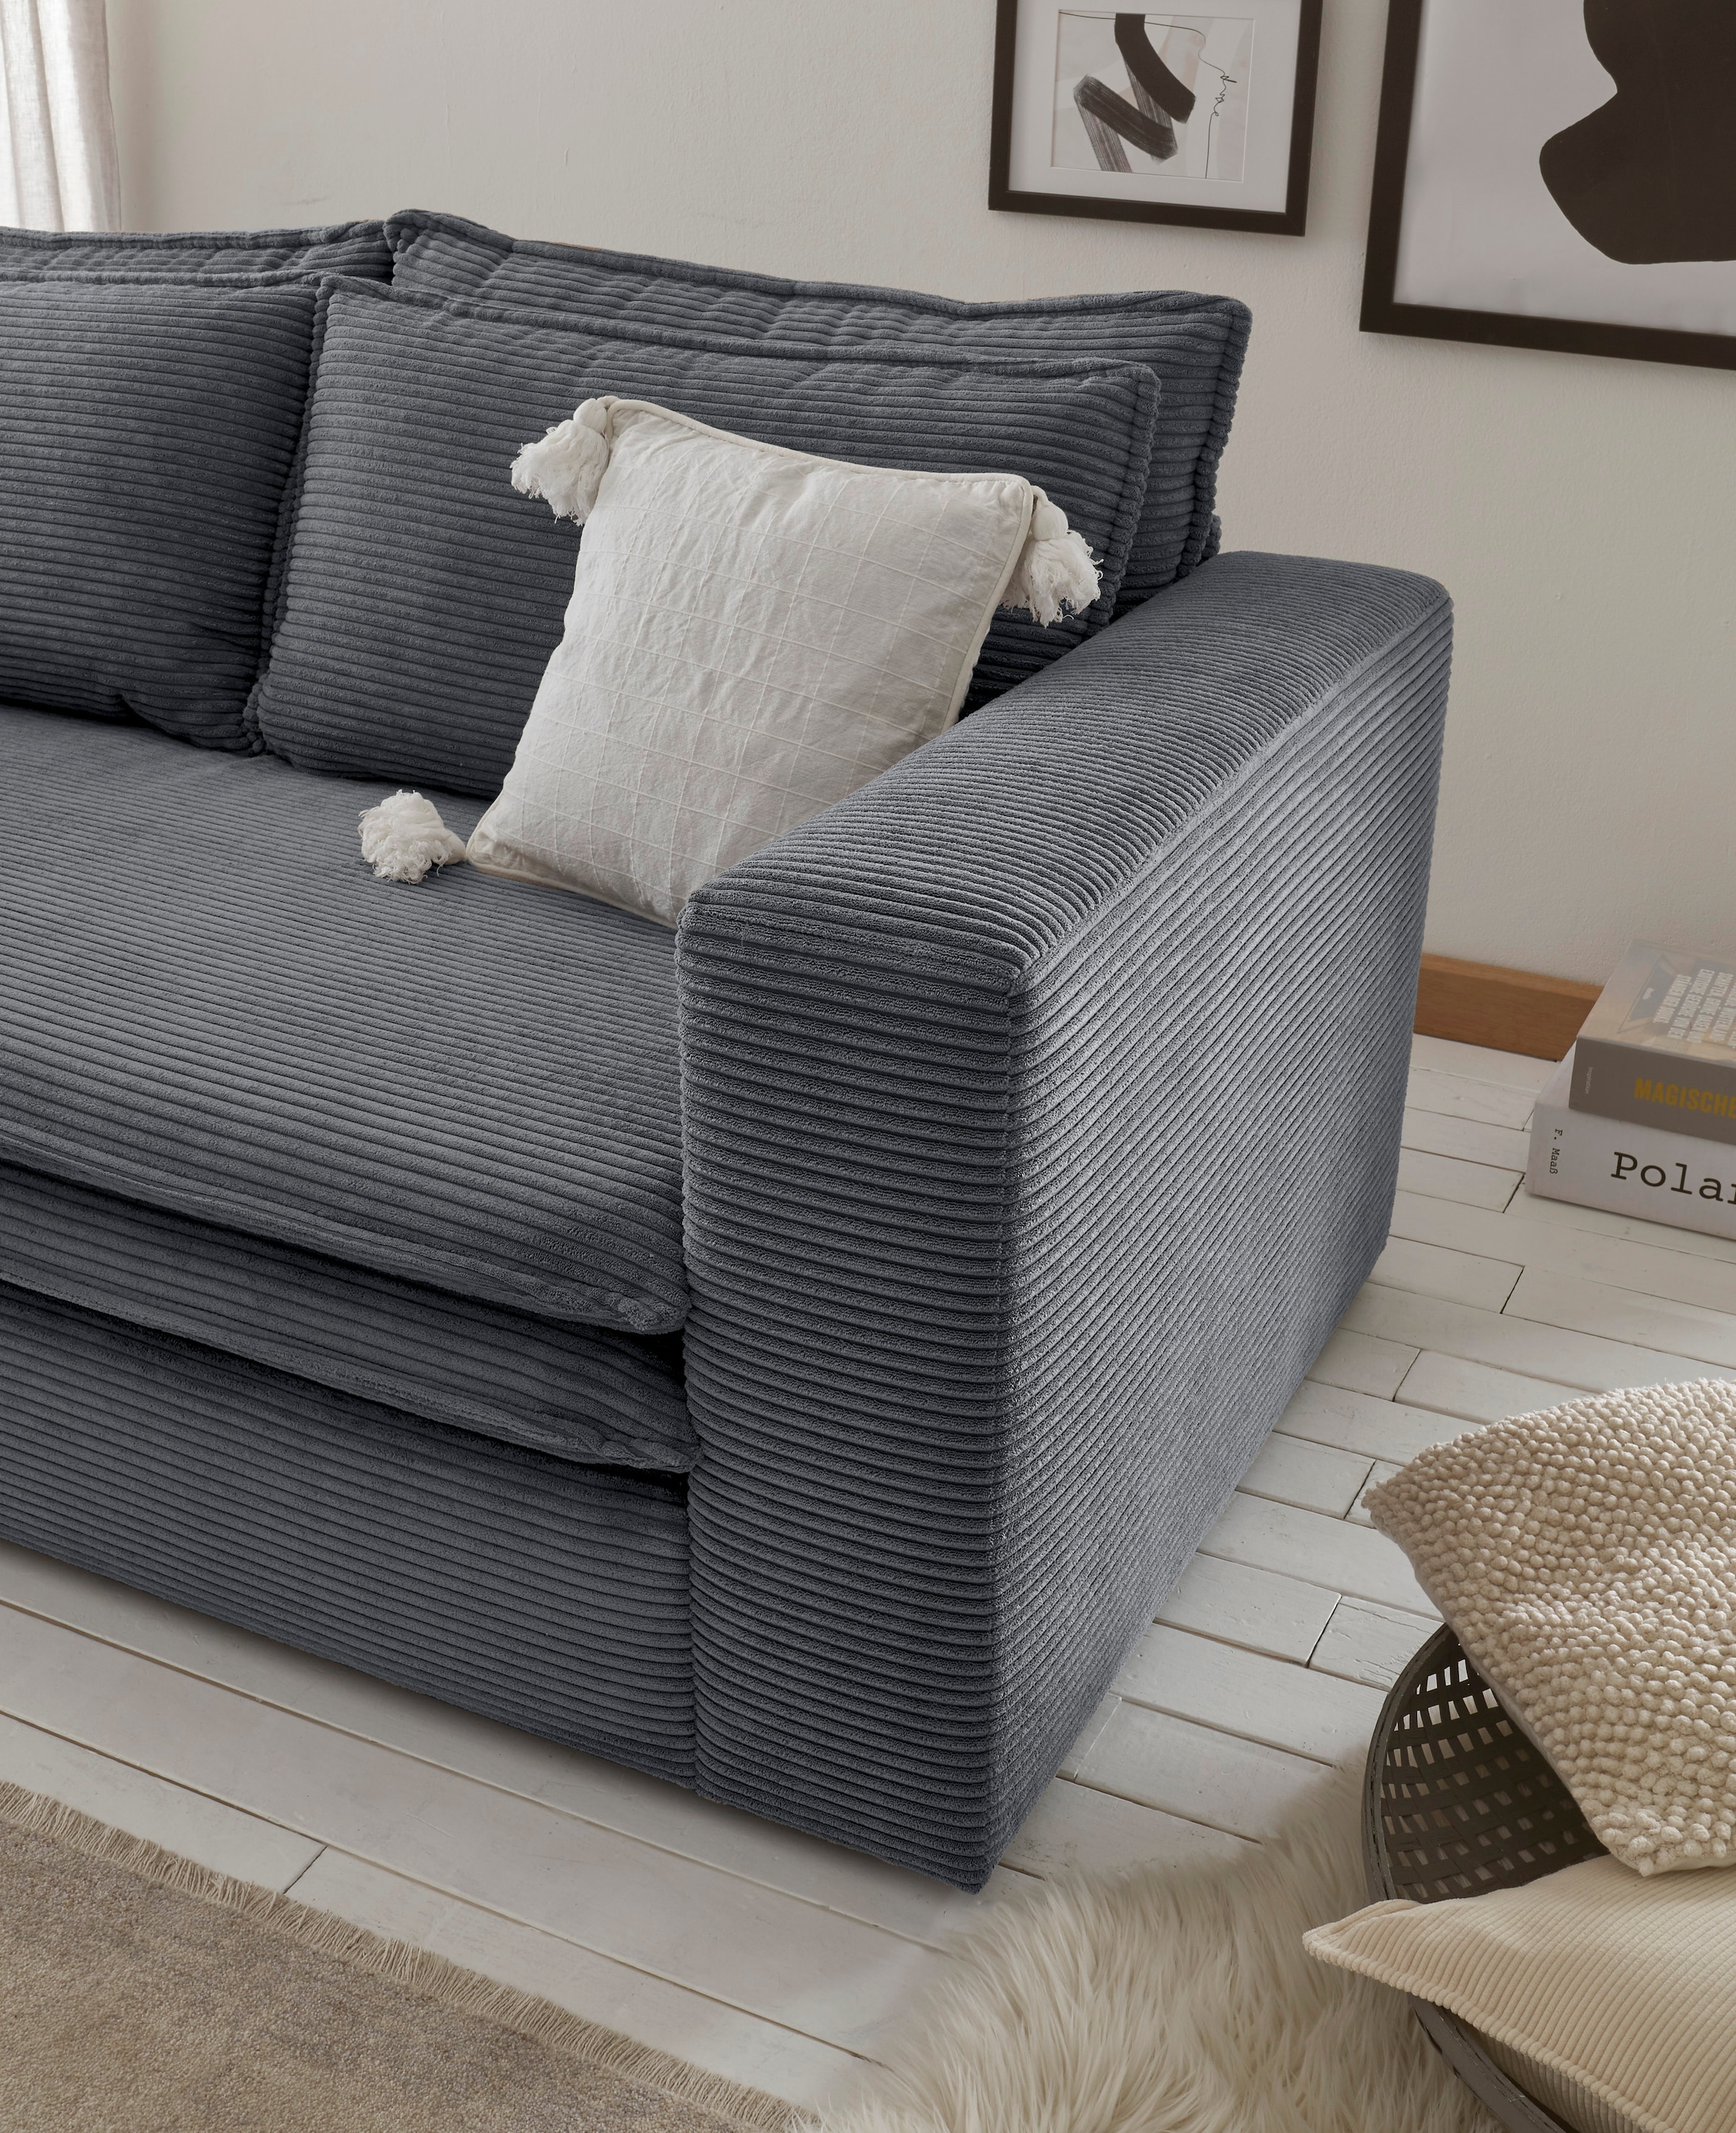 Places of Style Loveseat »PIAGGE«, OTTO bei Loveseat Hochwertiger Cord, trendiger